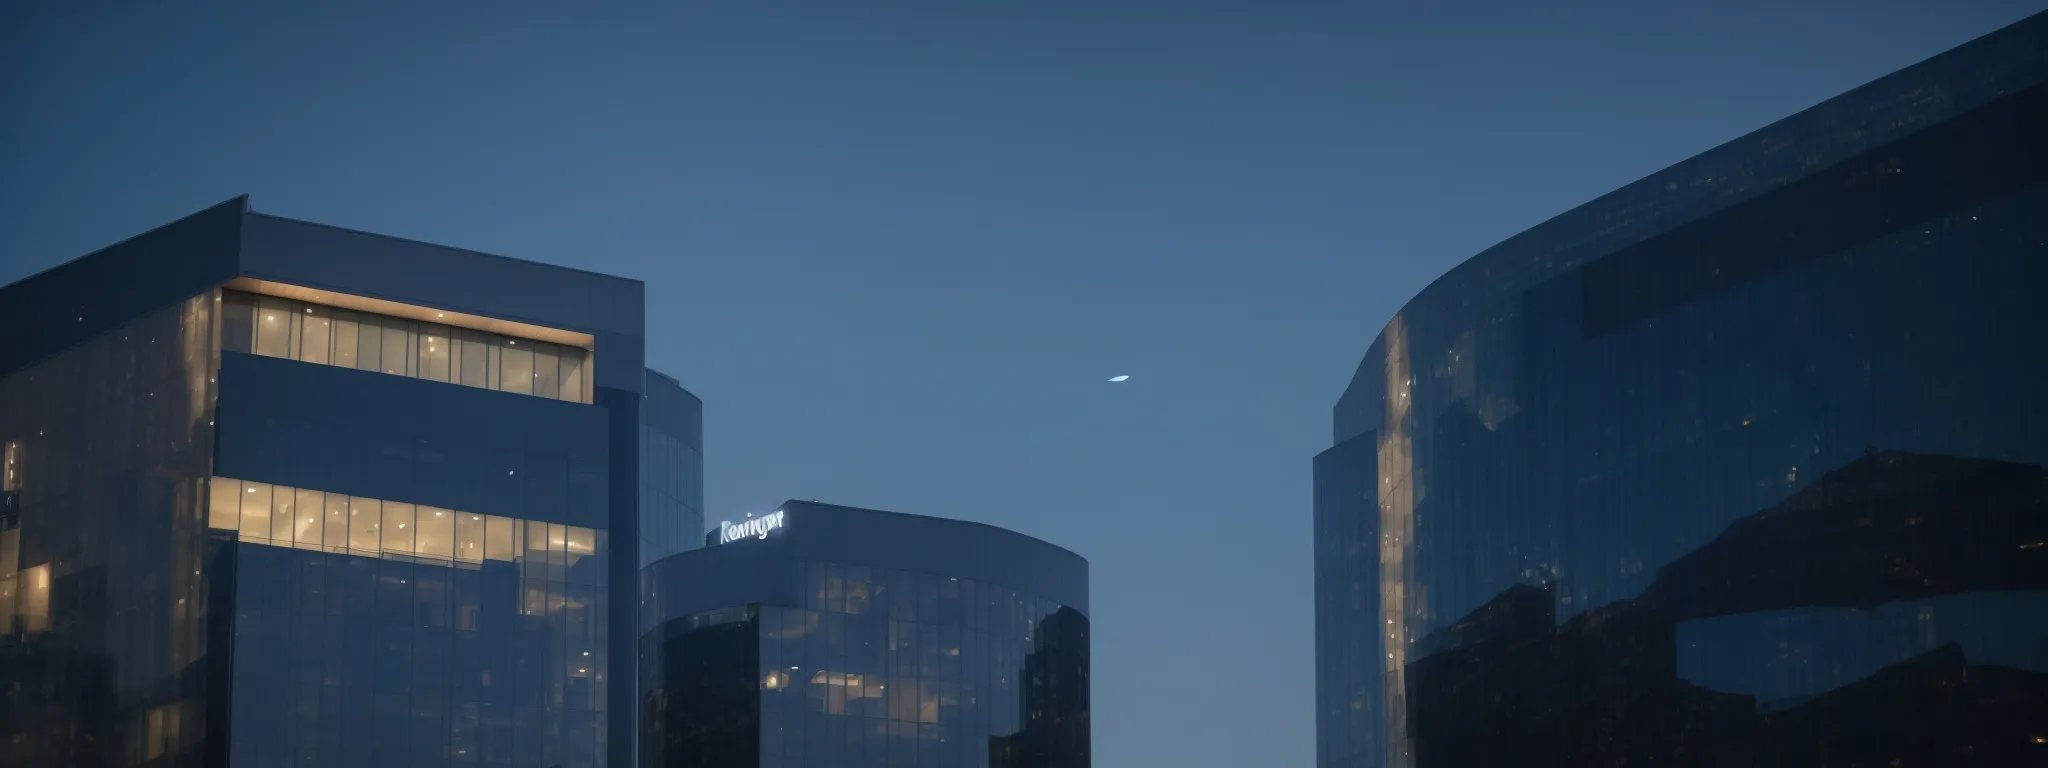 two corporate buildings with the logos of rank ranger and similarweb illuminated on their facades as they stand side by side under a clear sky.